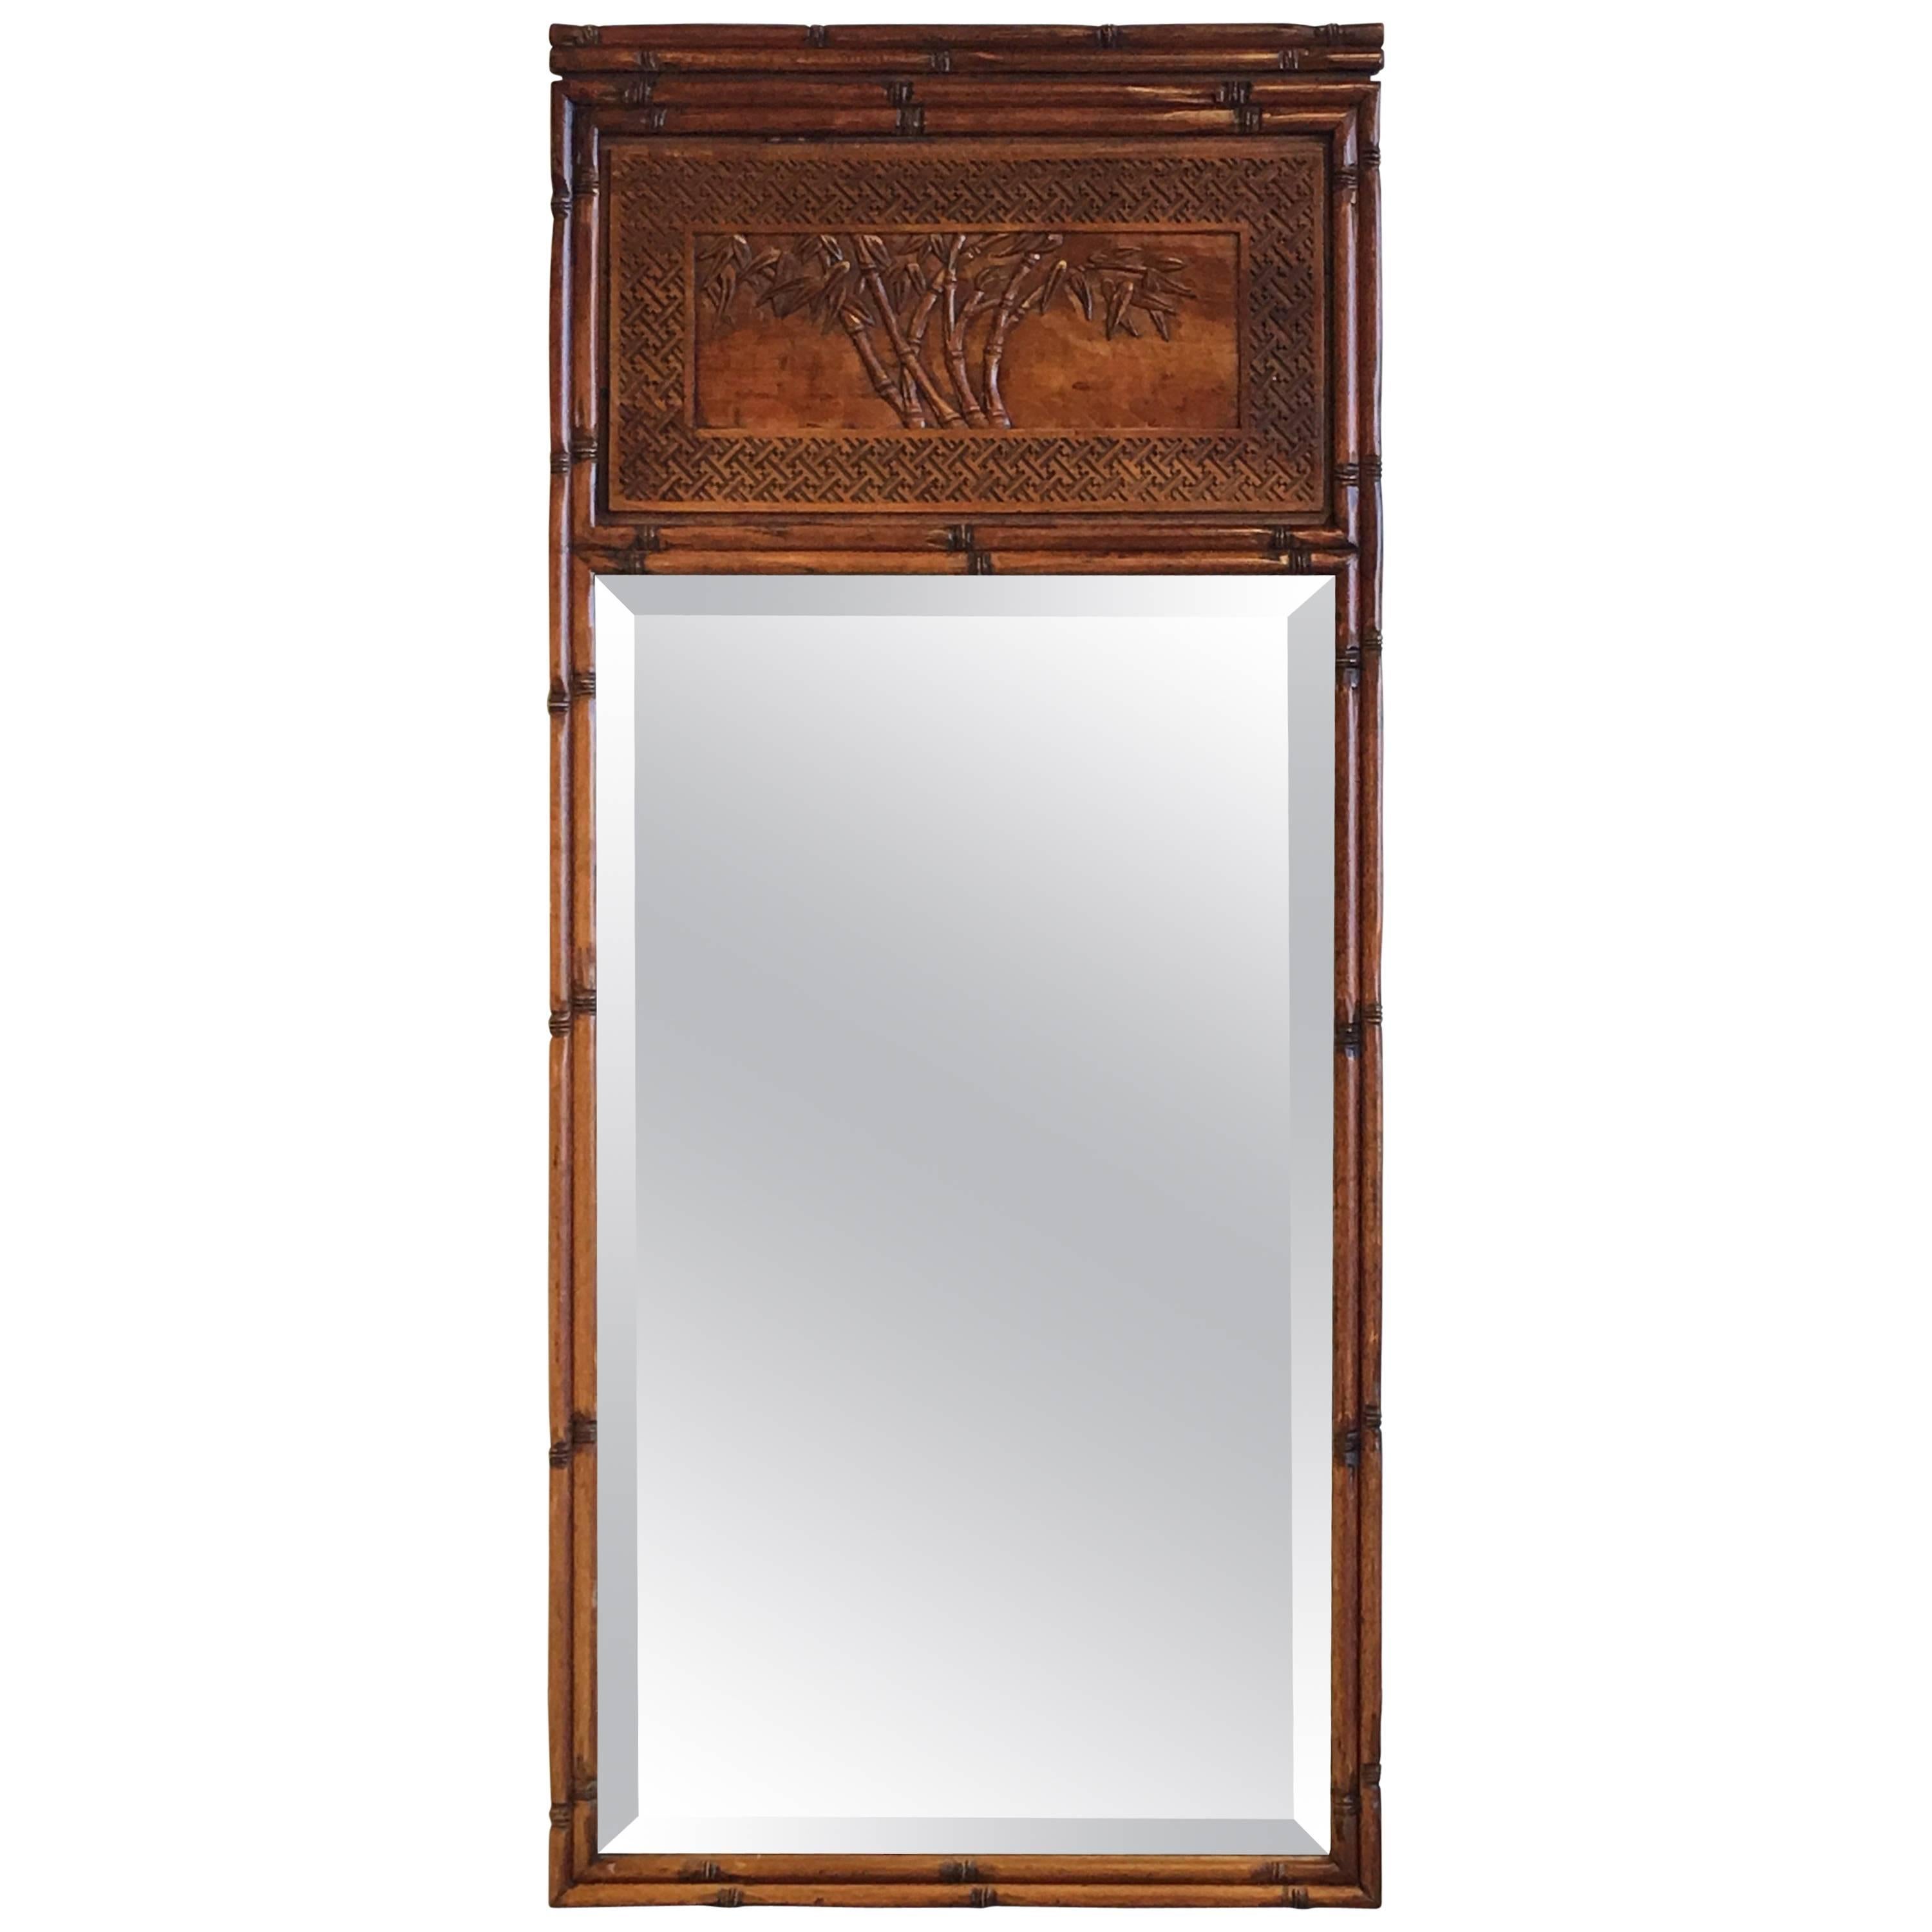 1950s Faux Bamboo Mirror with Carved Chinoiserie Trumeau and Greek Key Motif